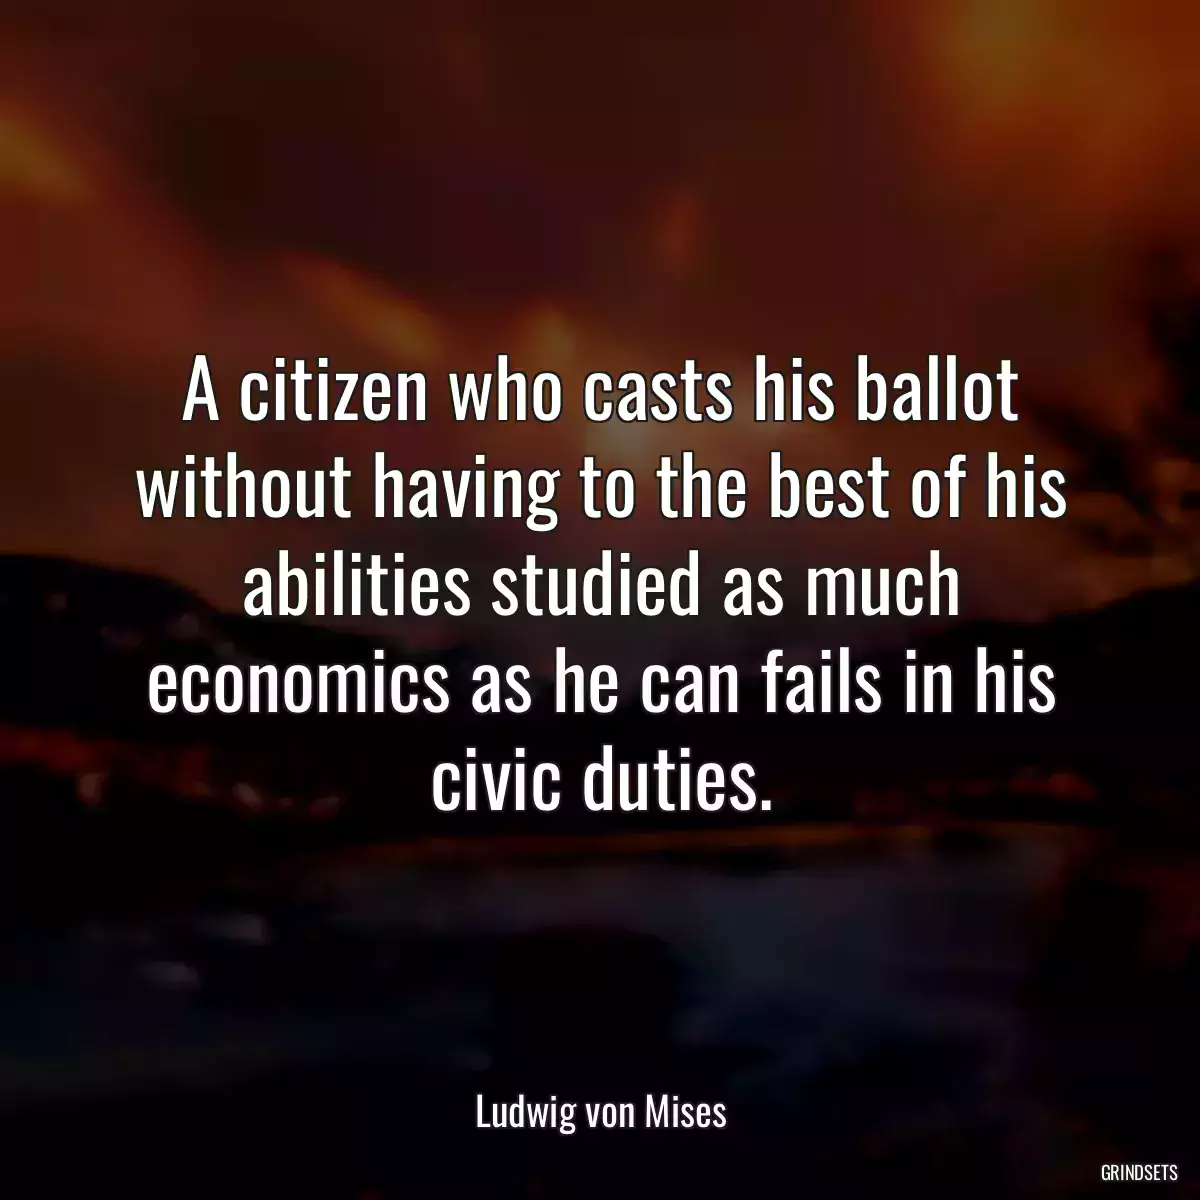 A citizen who casts his ballot without having to the best of his abilities studied as much economics as he can fails in his civic duties.